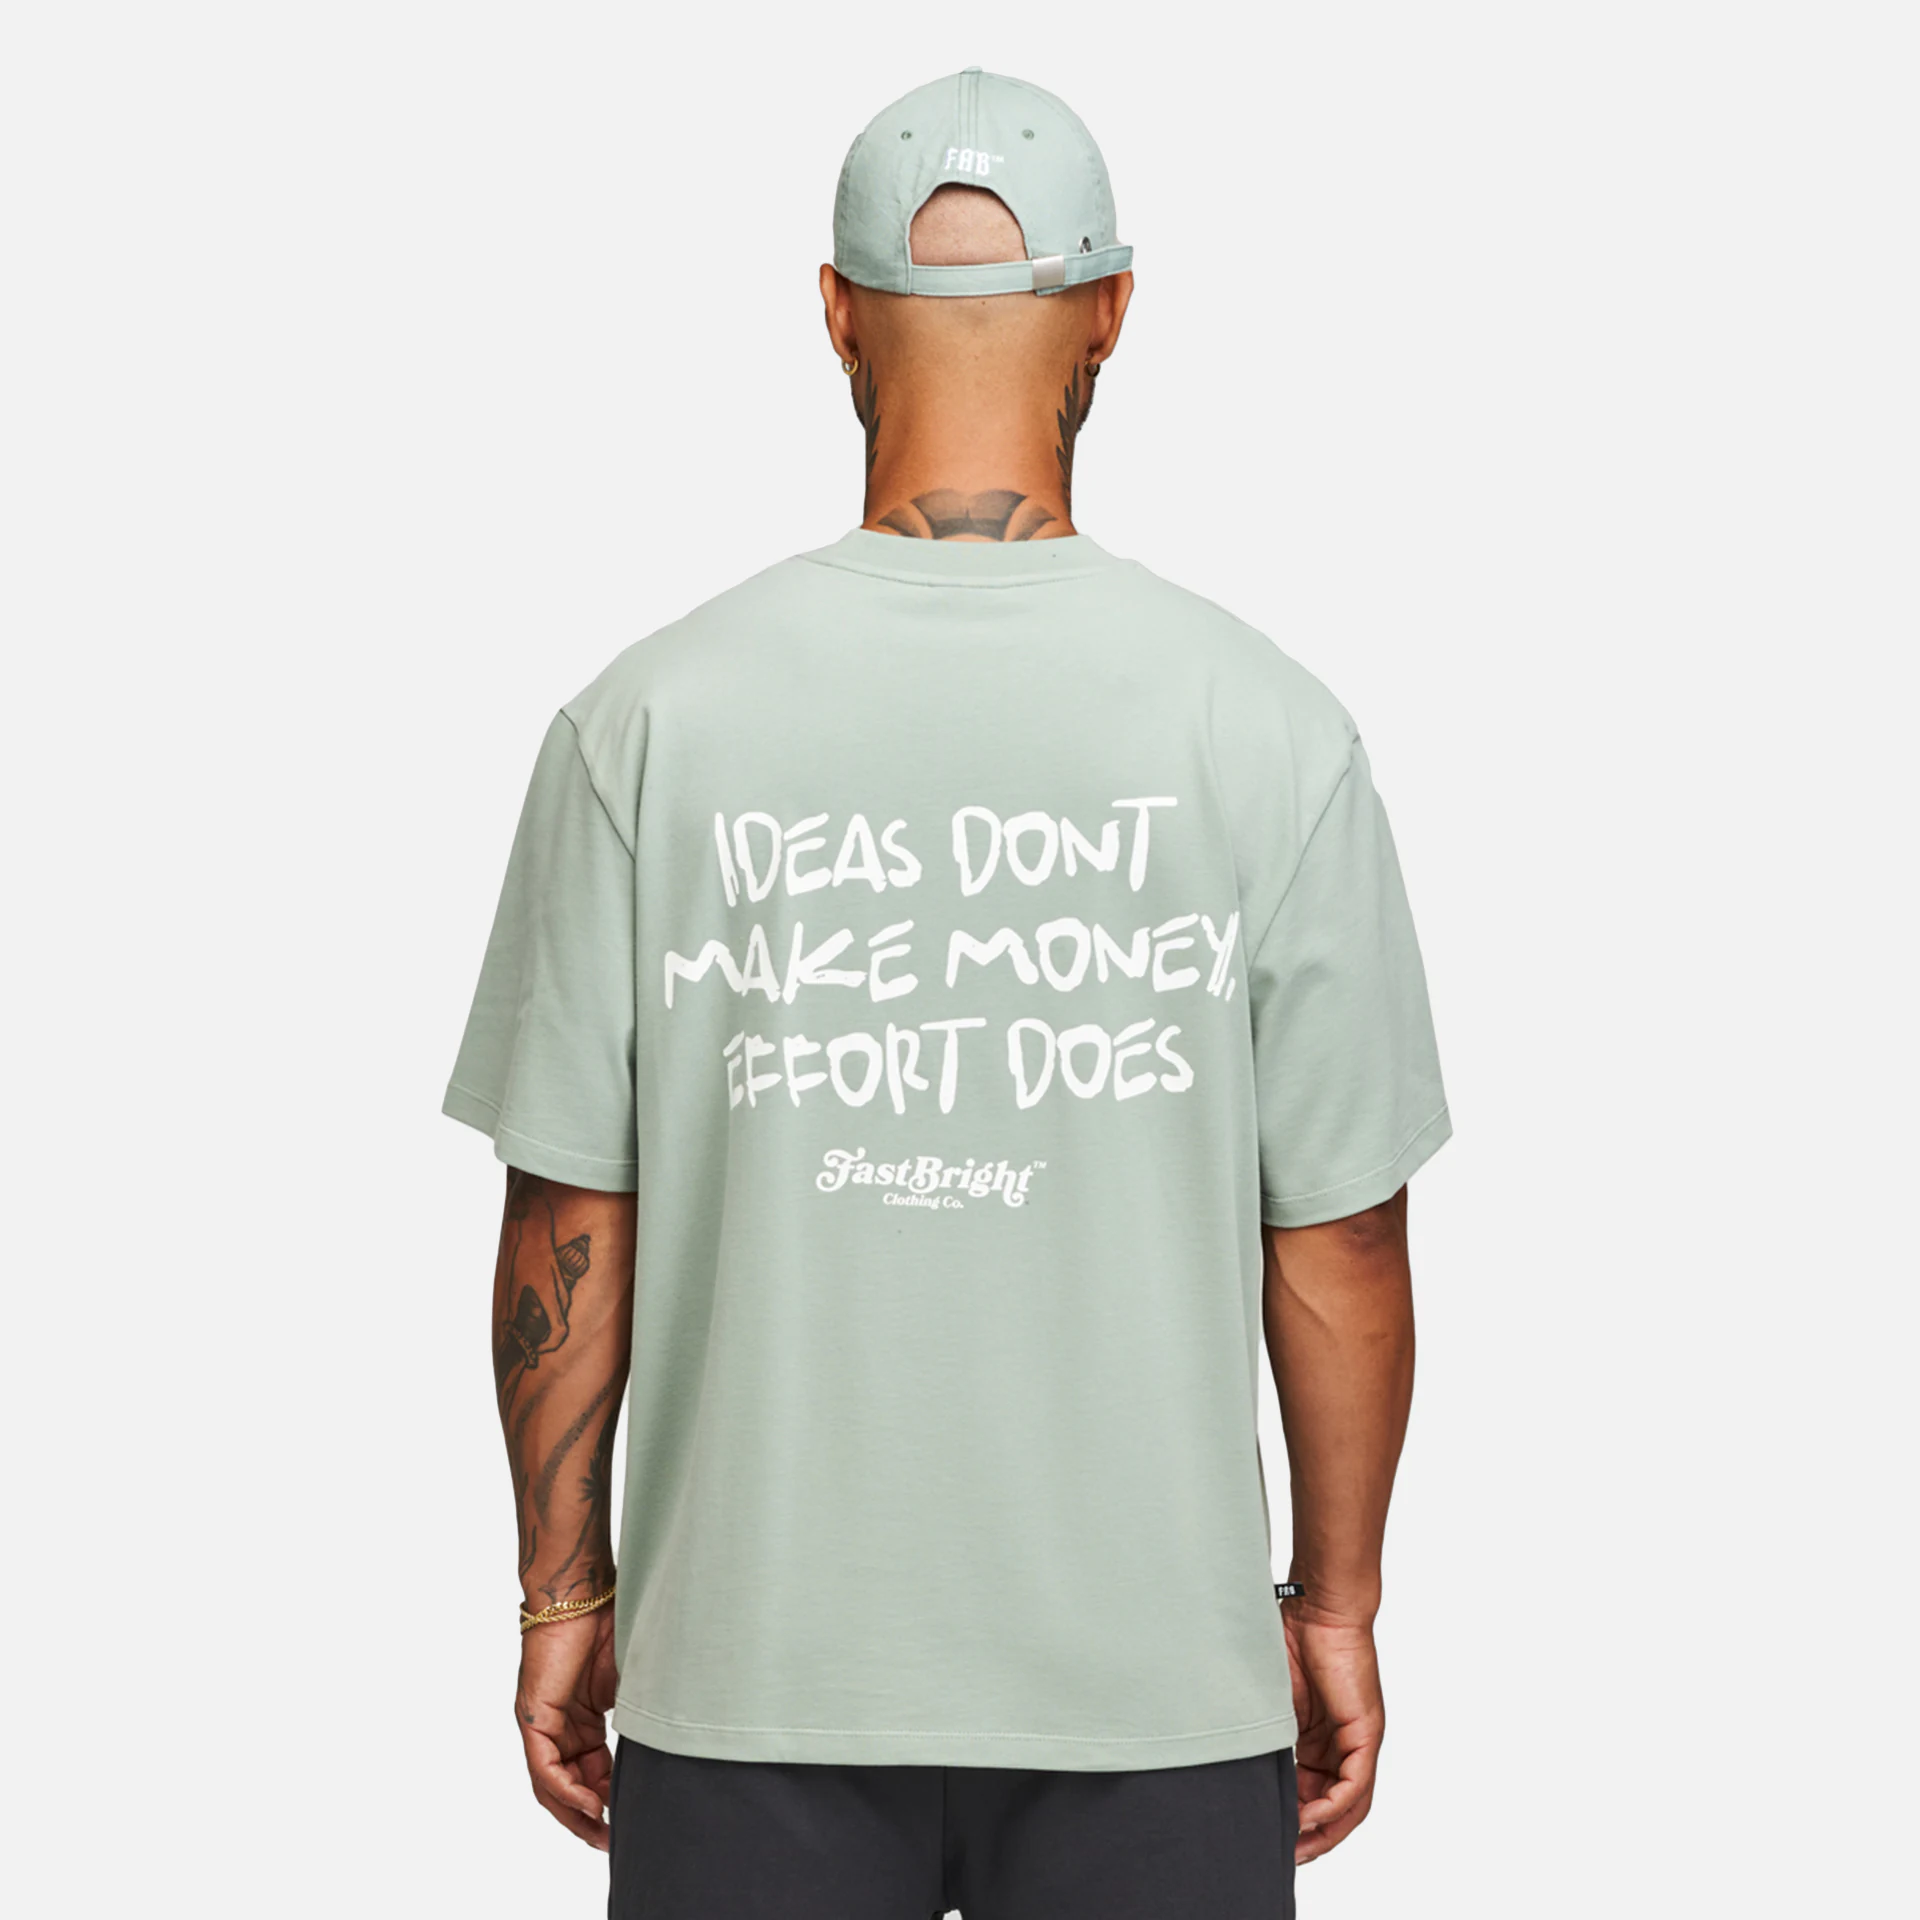 Fast and Bright Effort T-Shirt Slate Grey/Green